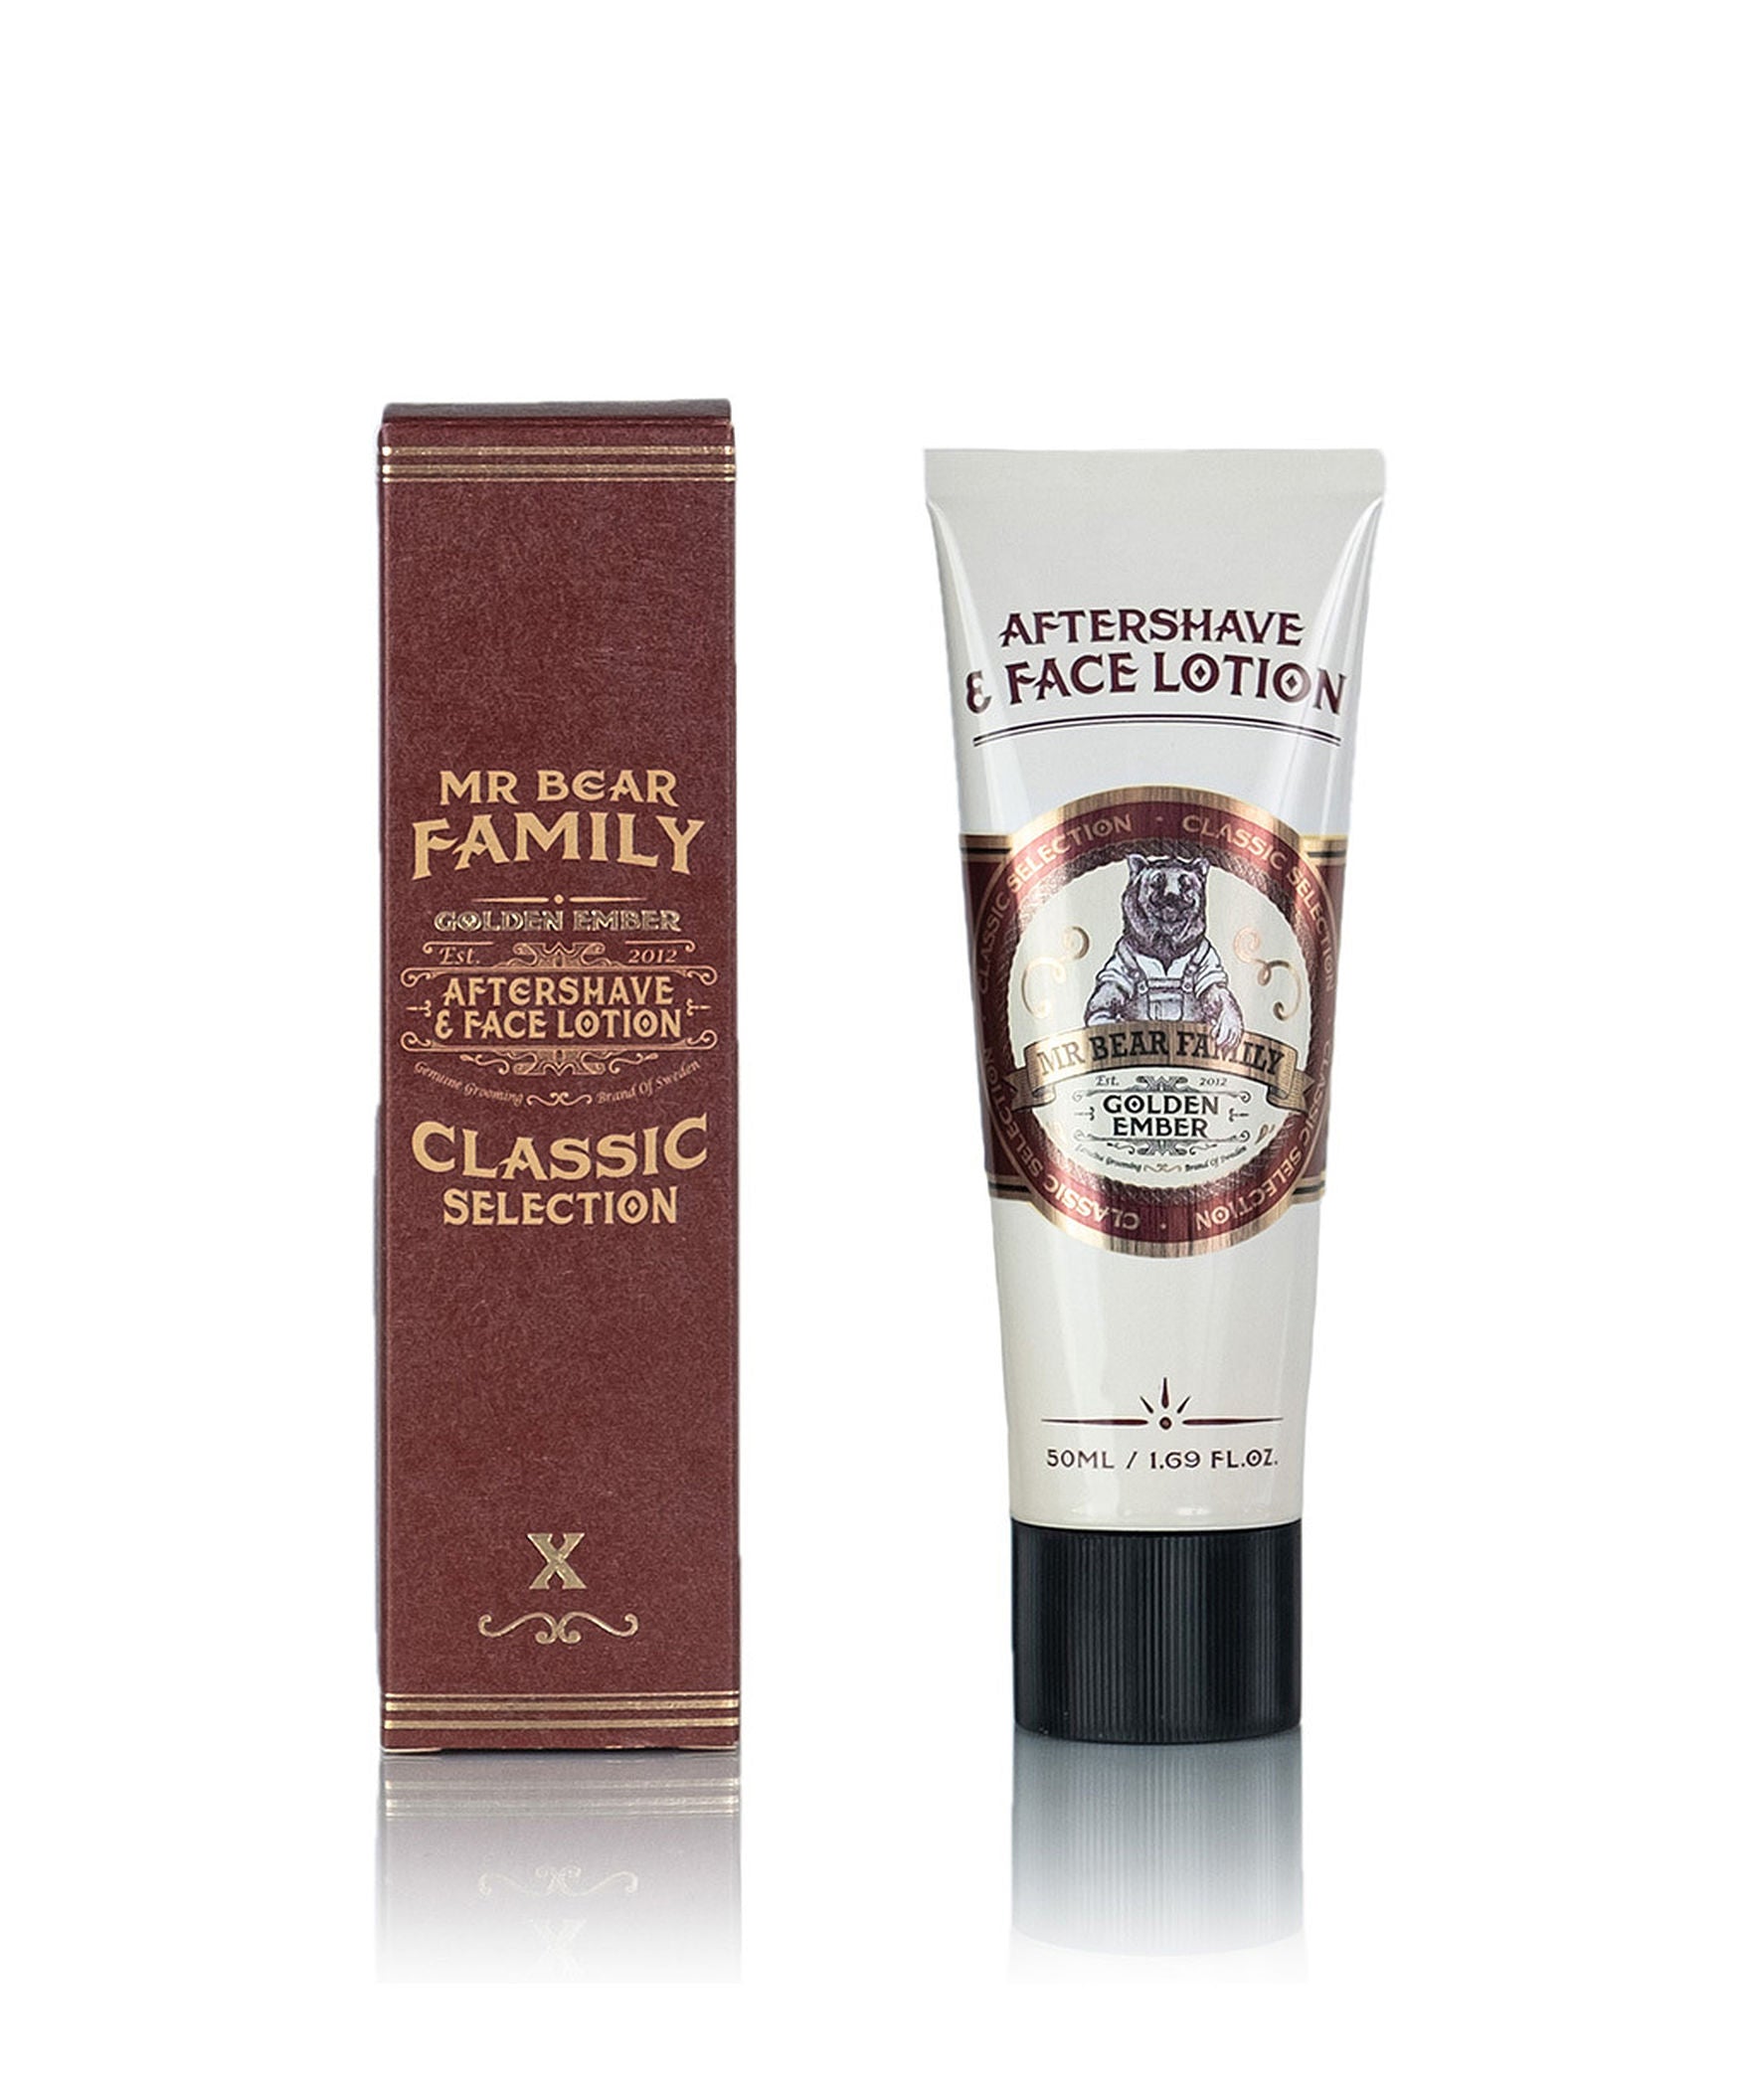 Mr Bear Family Aftershave & Face Lotion Golden Ember